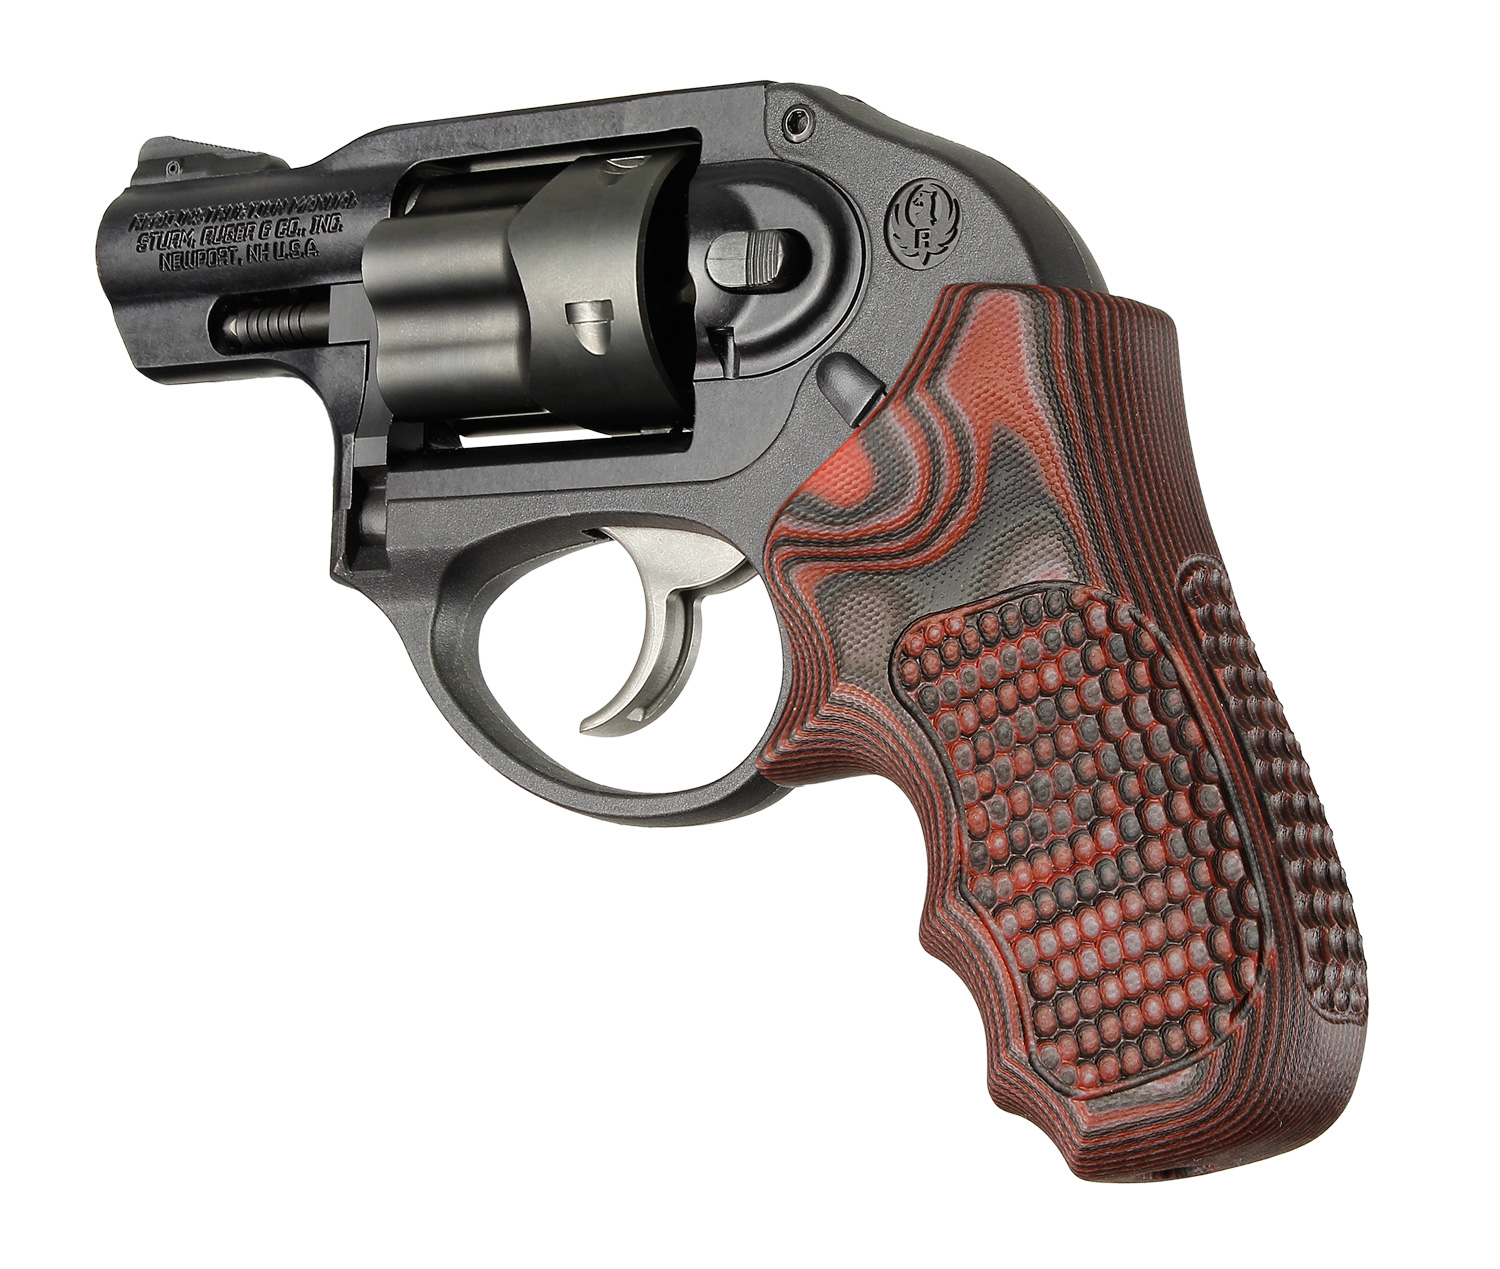 A Ruger LCR decked out with Hogue Grips, in this case the polymer G10s.